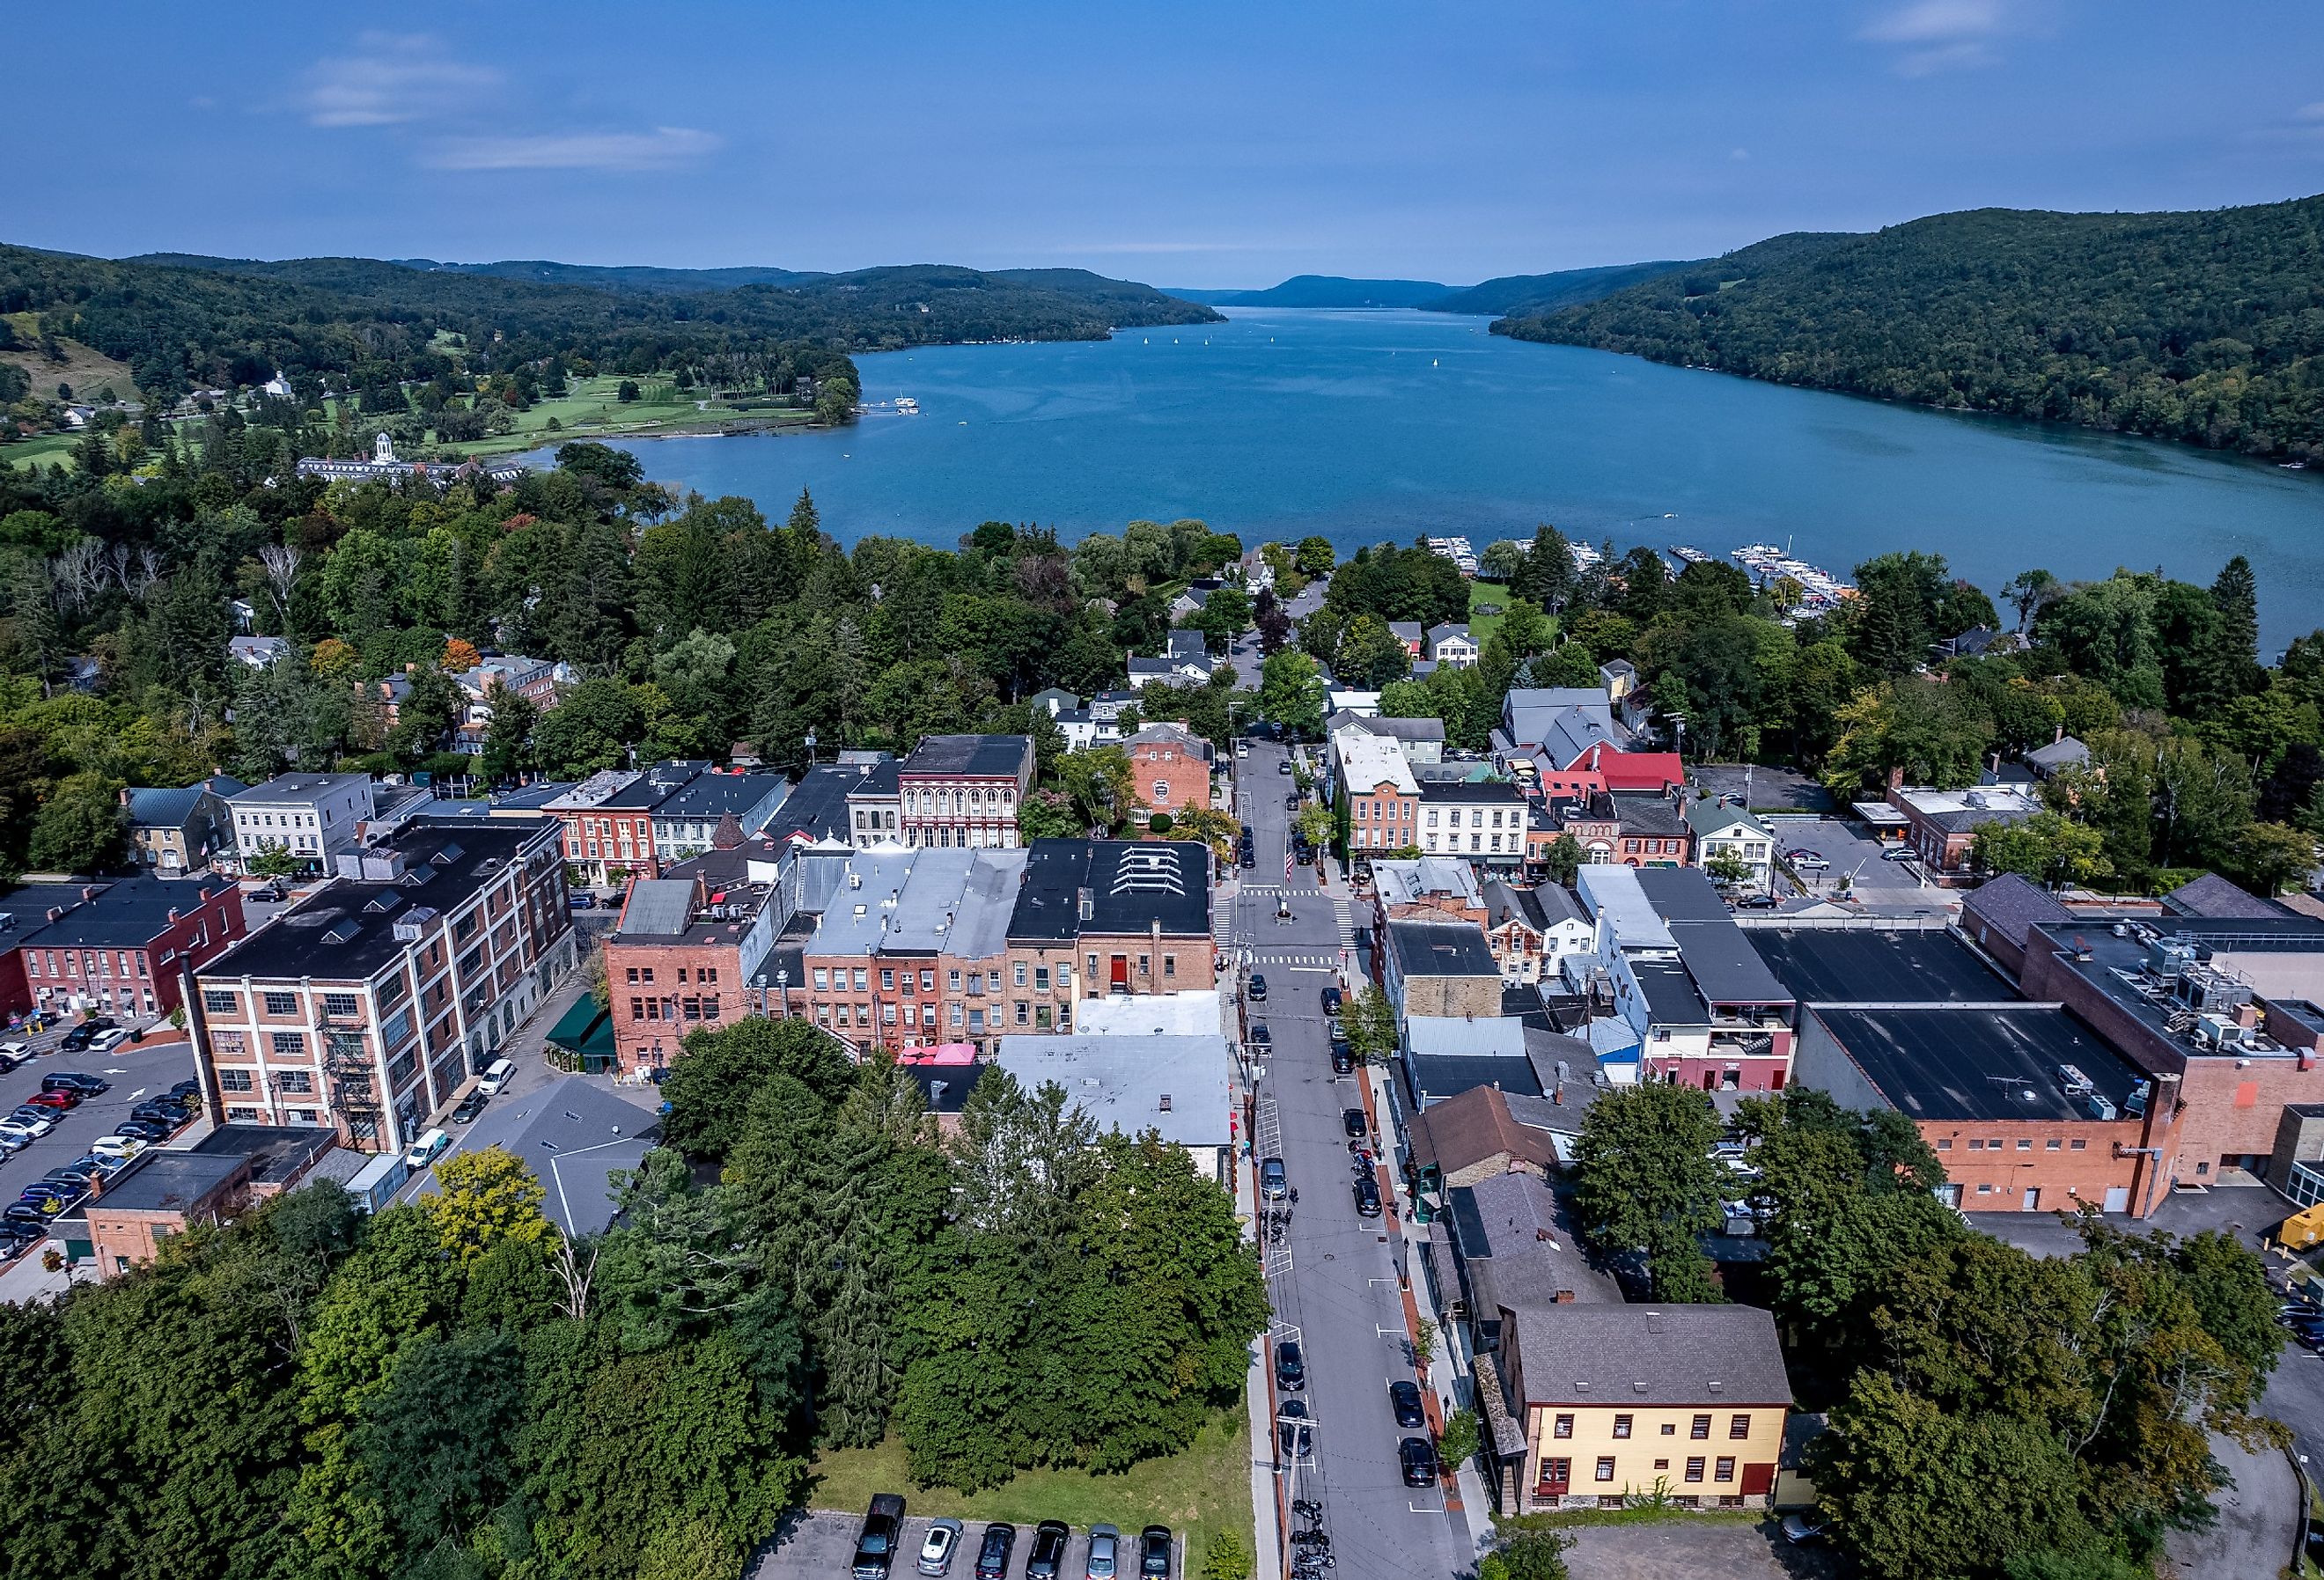 Aerial view of Cooperstown, New York with the water in the background.